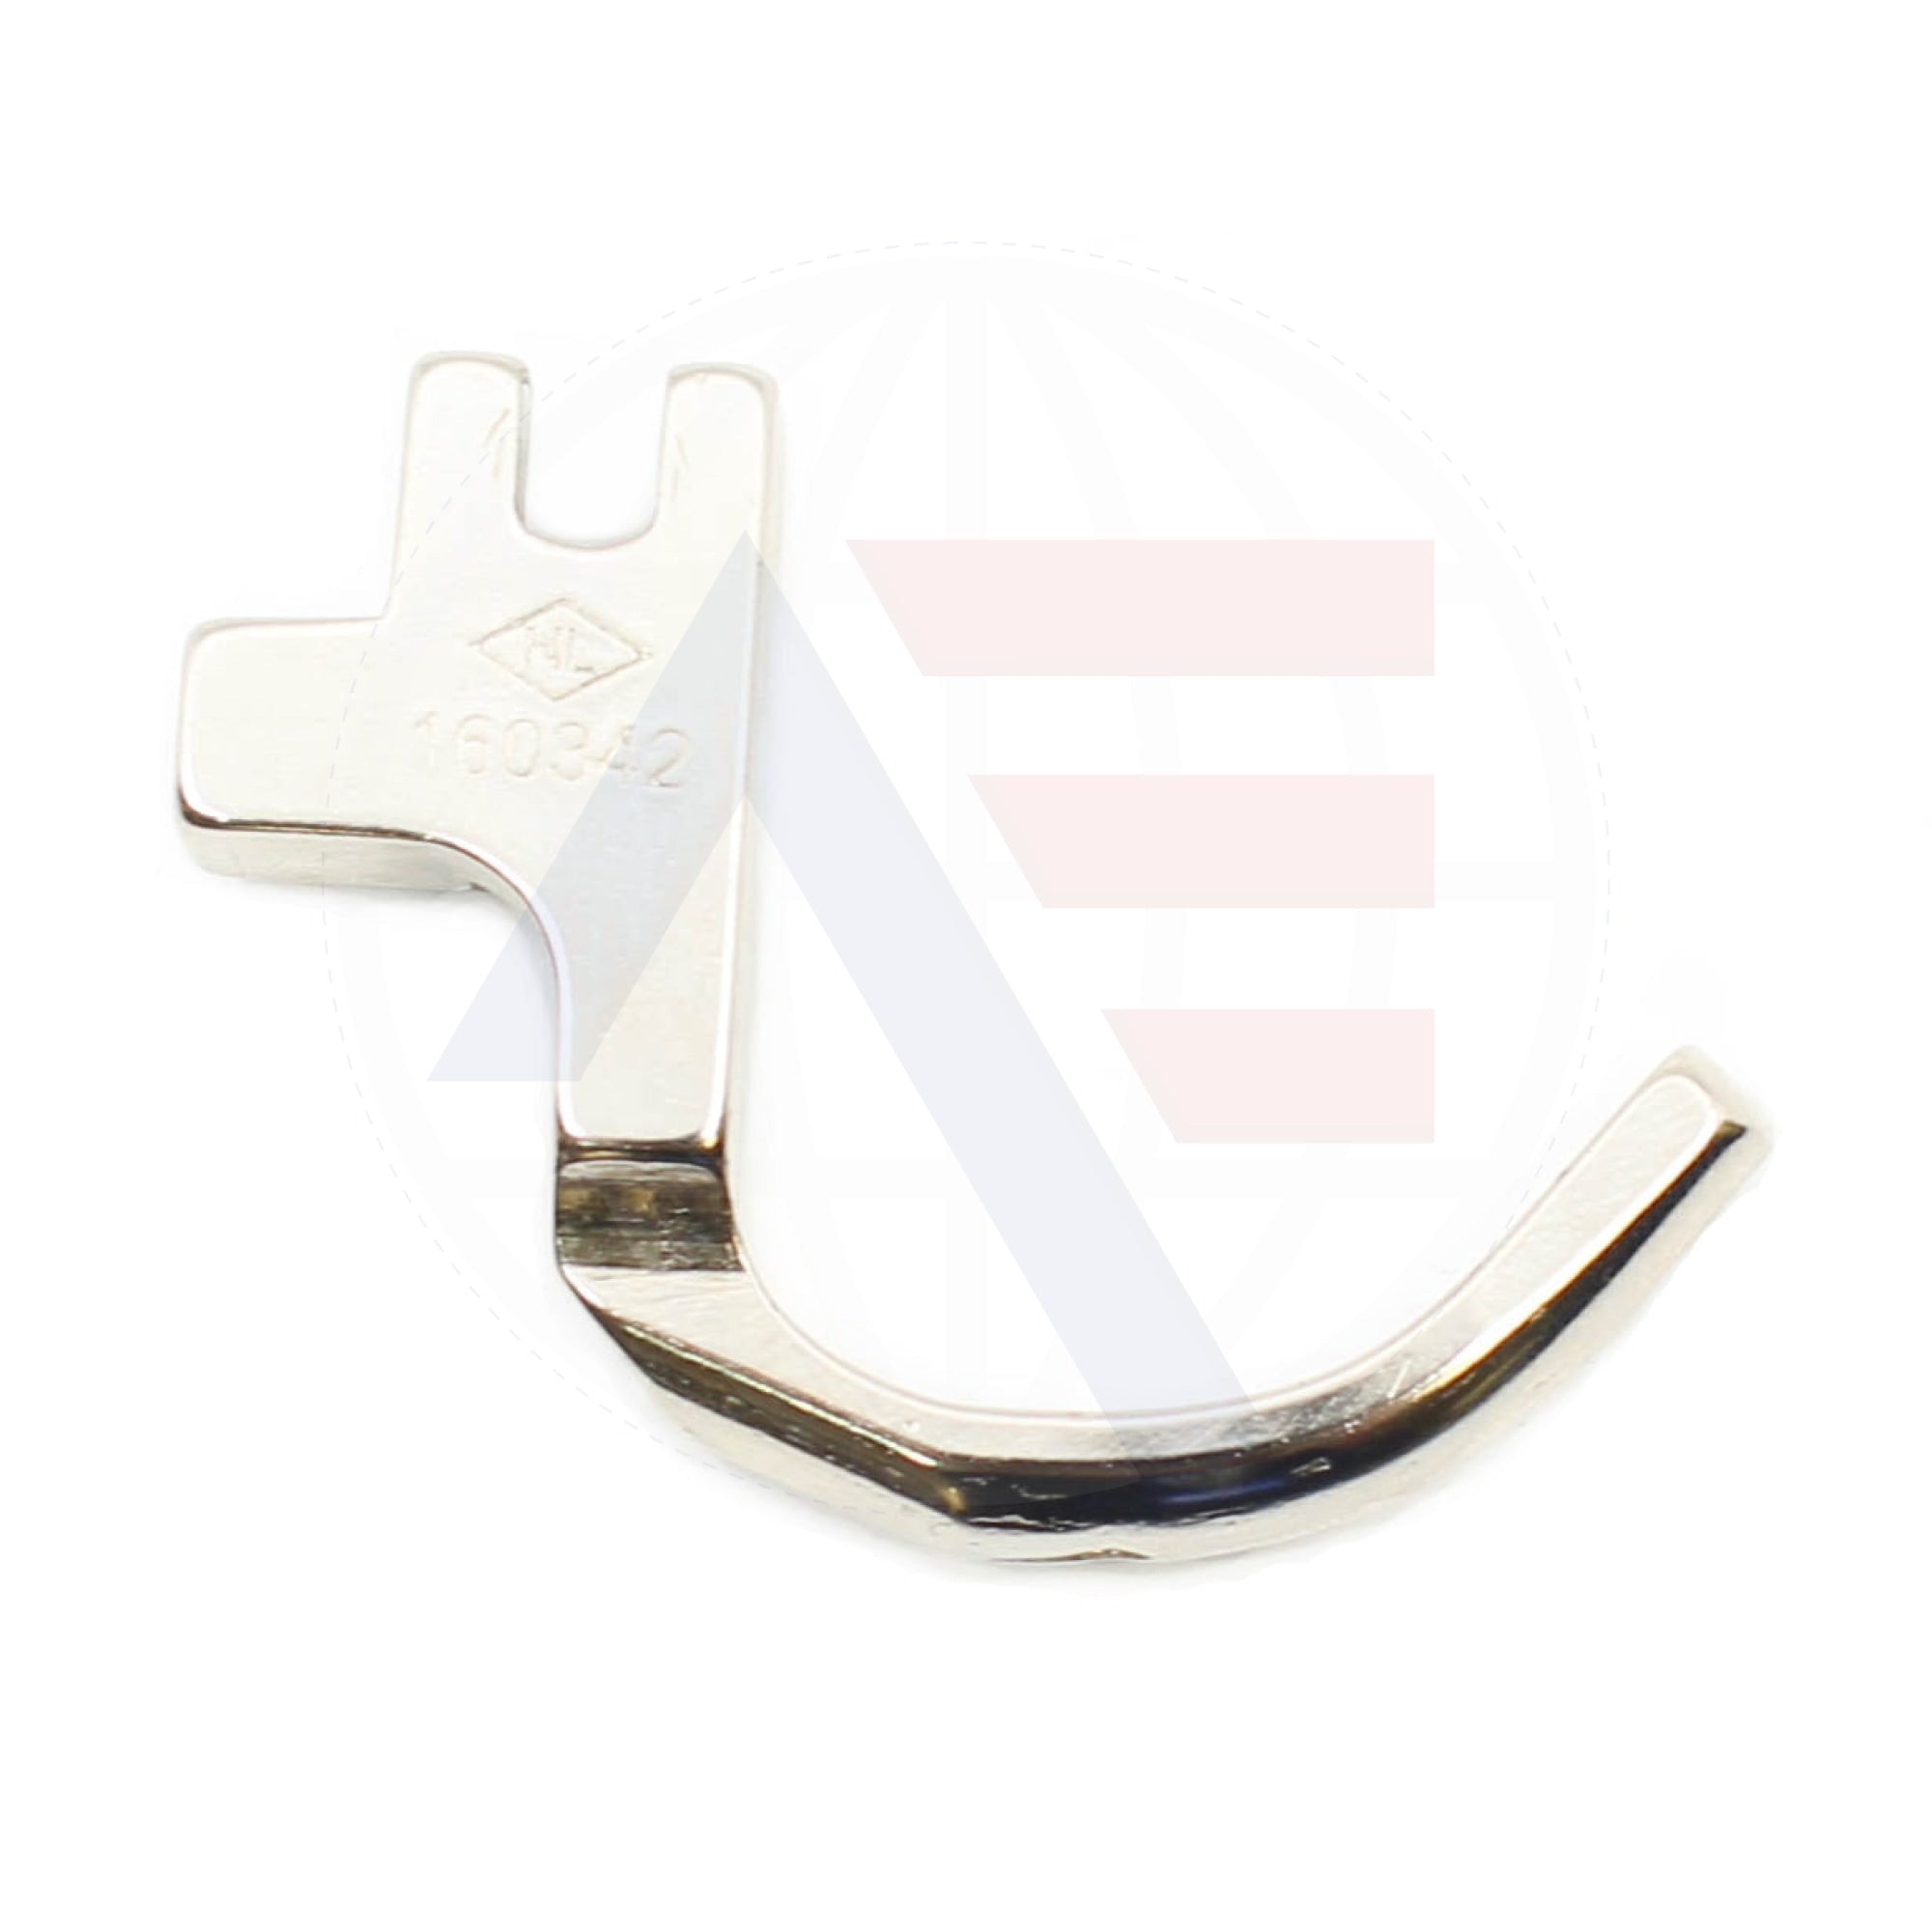 160342 Quilting Foot Sewing Machine Spare Parts